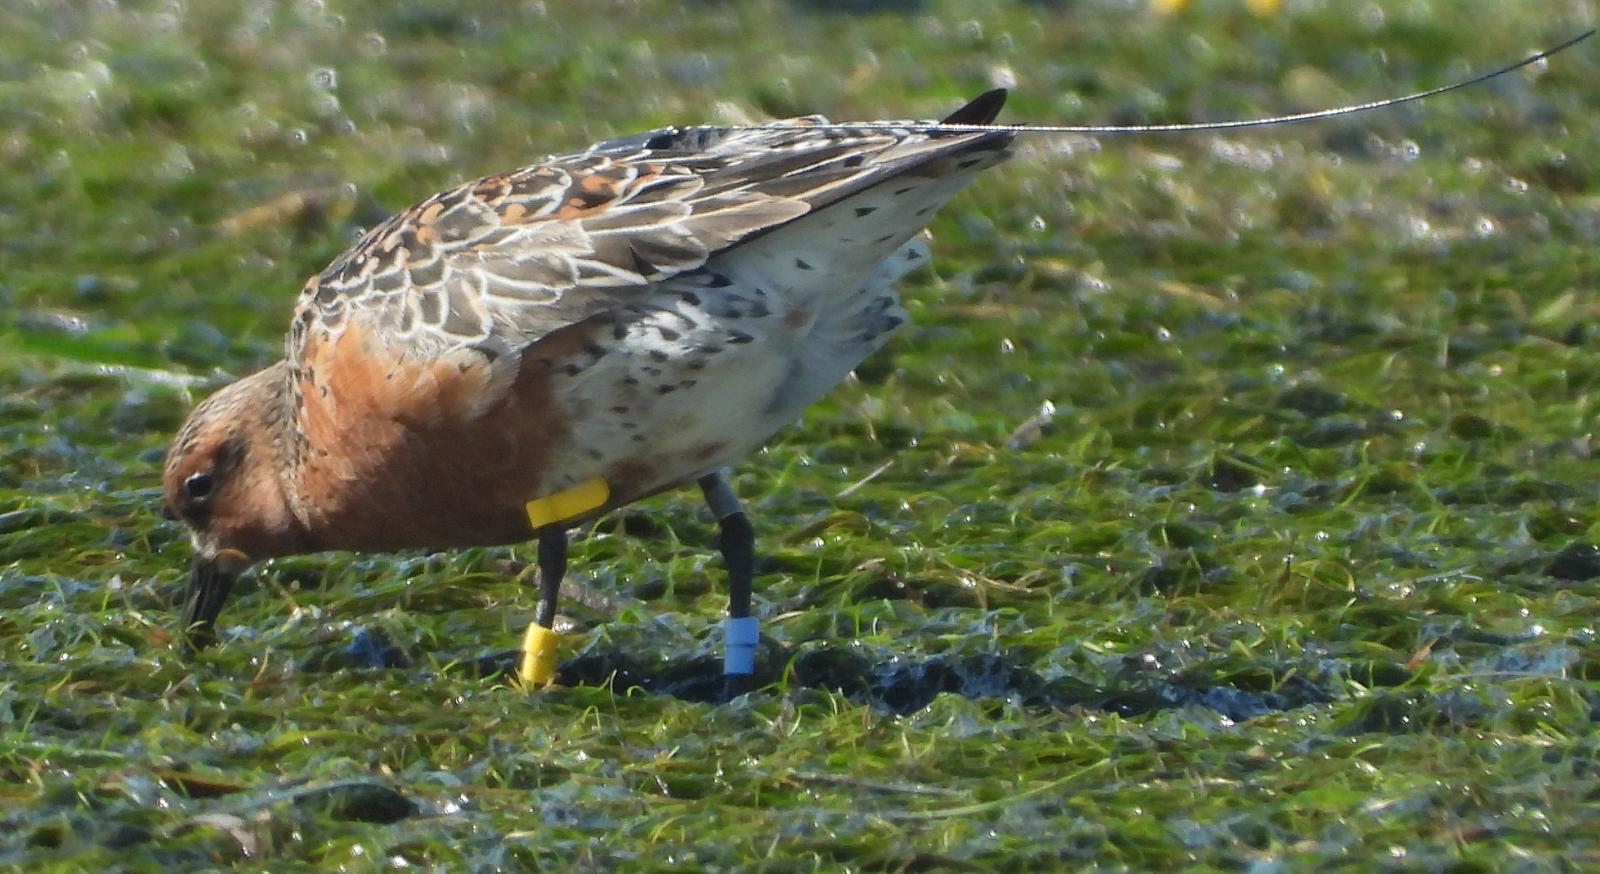 Satellite-tagged red knot R’Gueba (now on Schiermonnikoog) always stood out due to her remarkedly red and fat appearance in comparison with her flock mates on the seagrass covered mudflats of the Banc d’Arguin. Photo: Tim Oortwijn